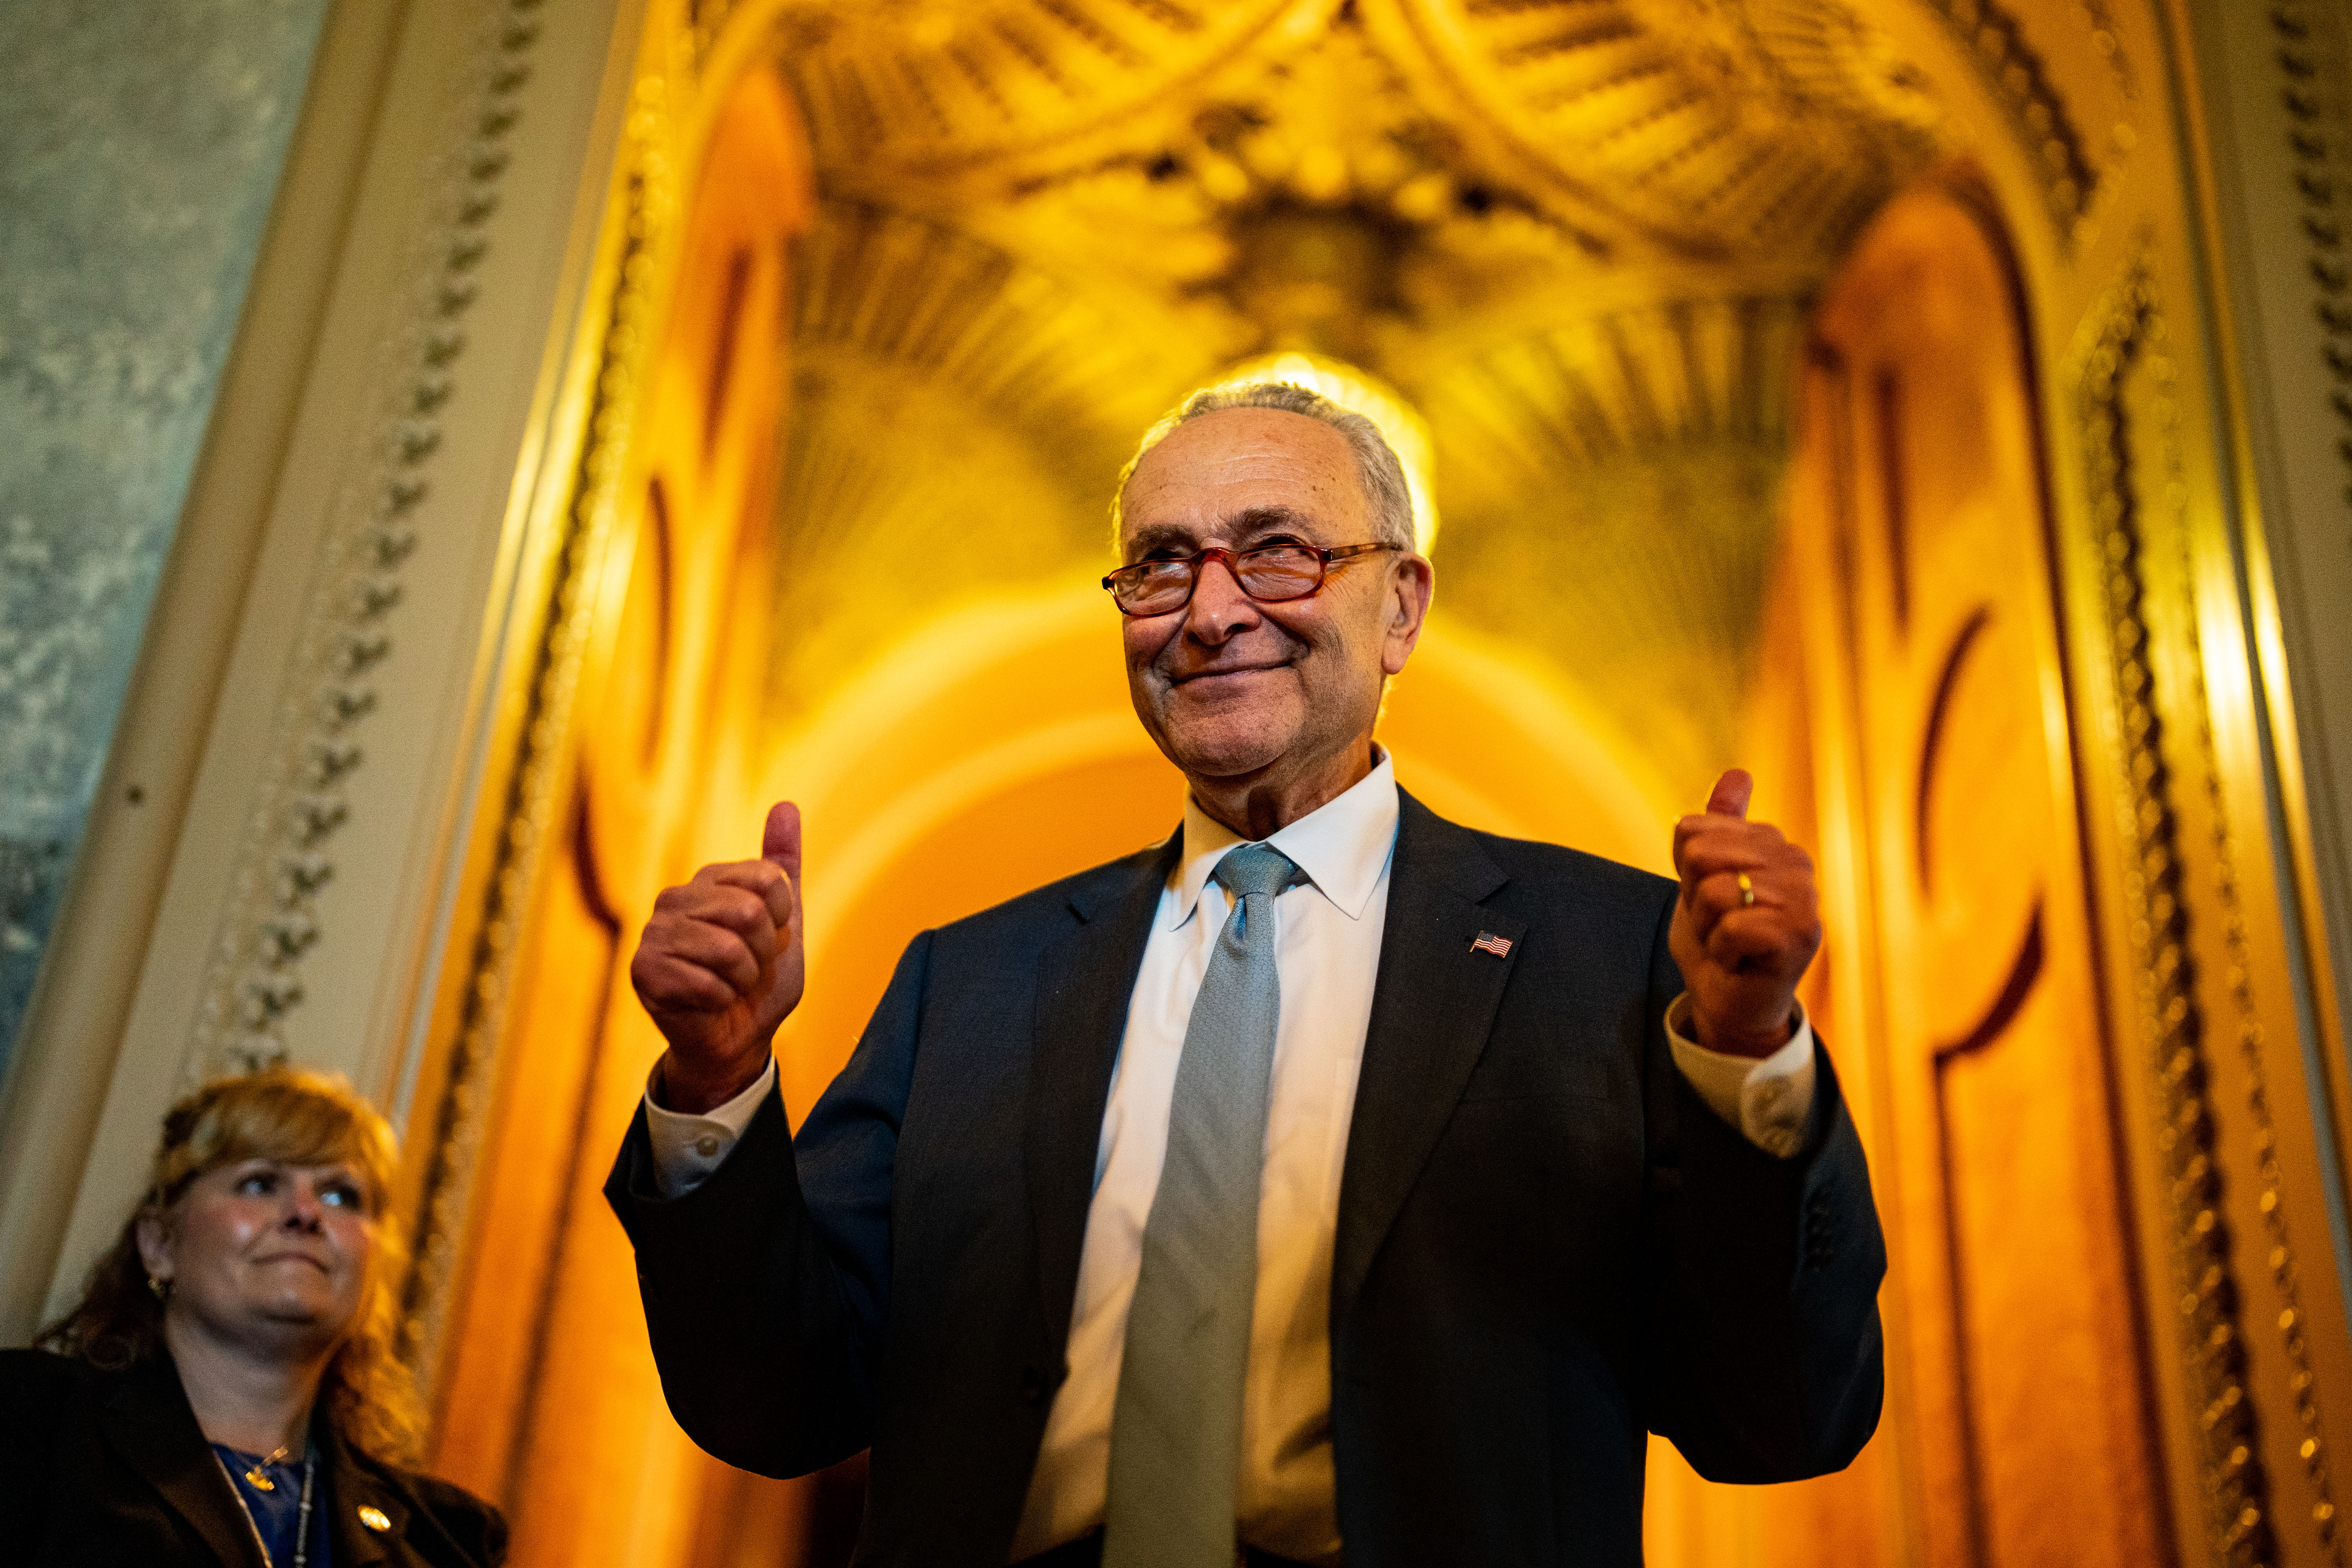 Senator Schumer smiling and making a thumbs-up gesture.